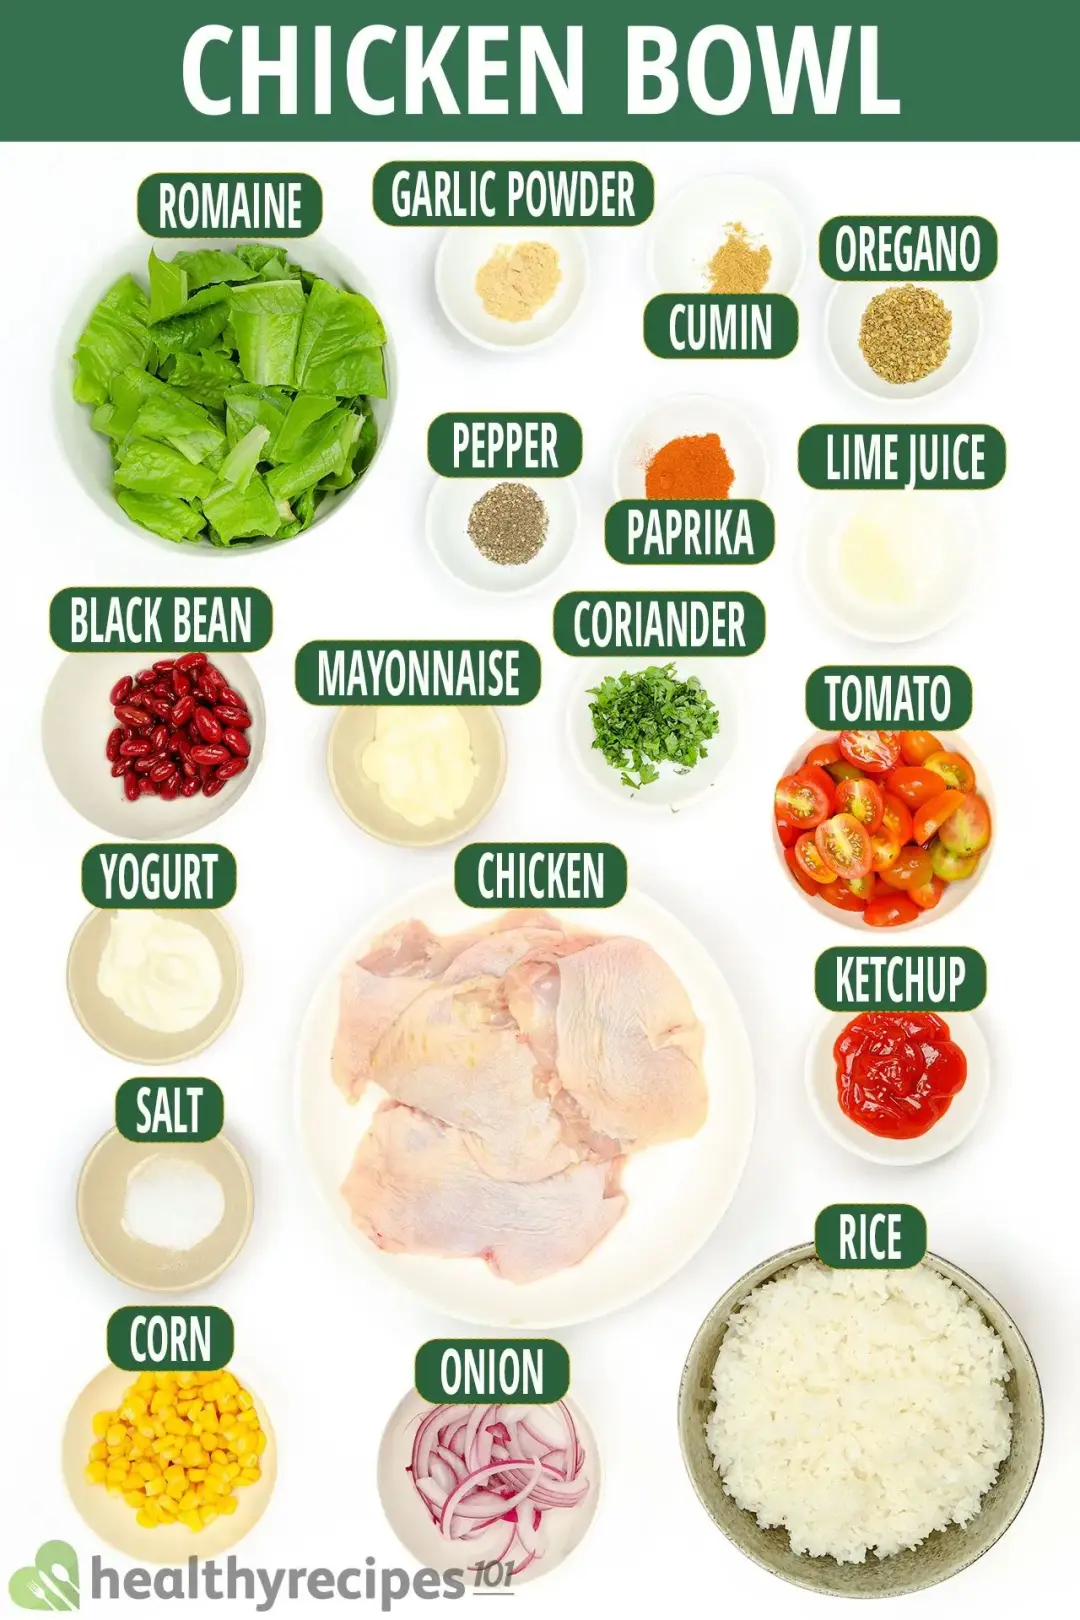 ingredients for Chicken Bowl